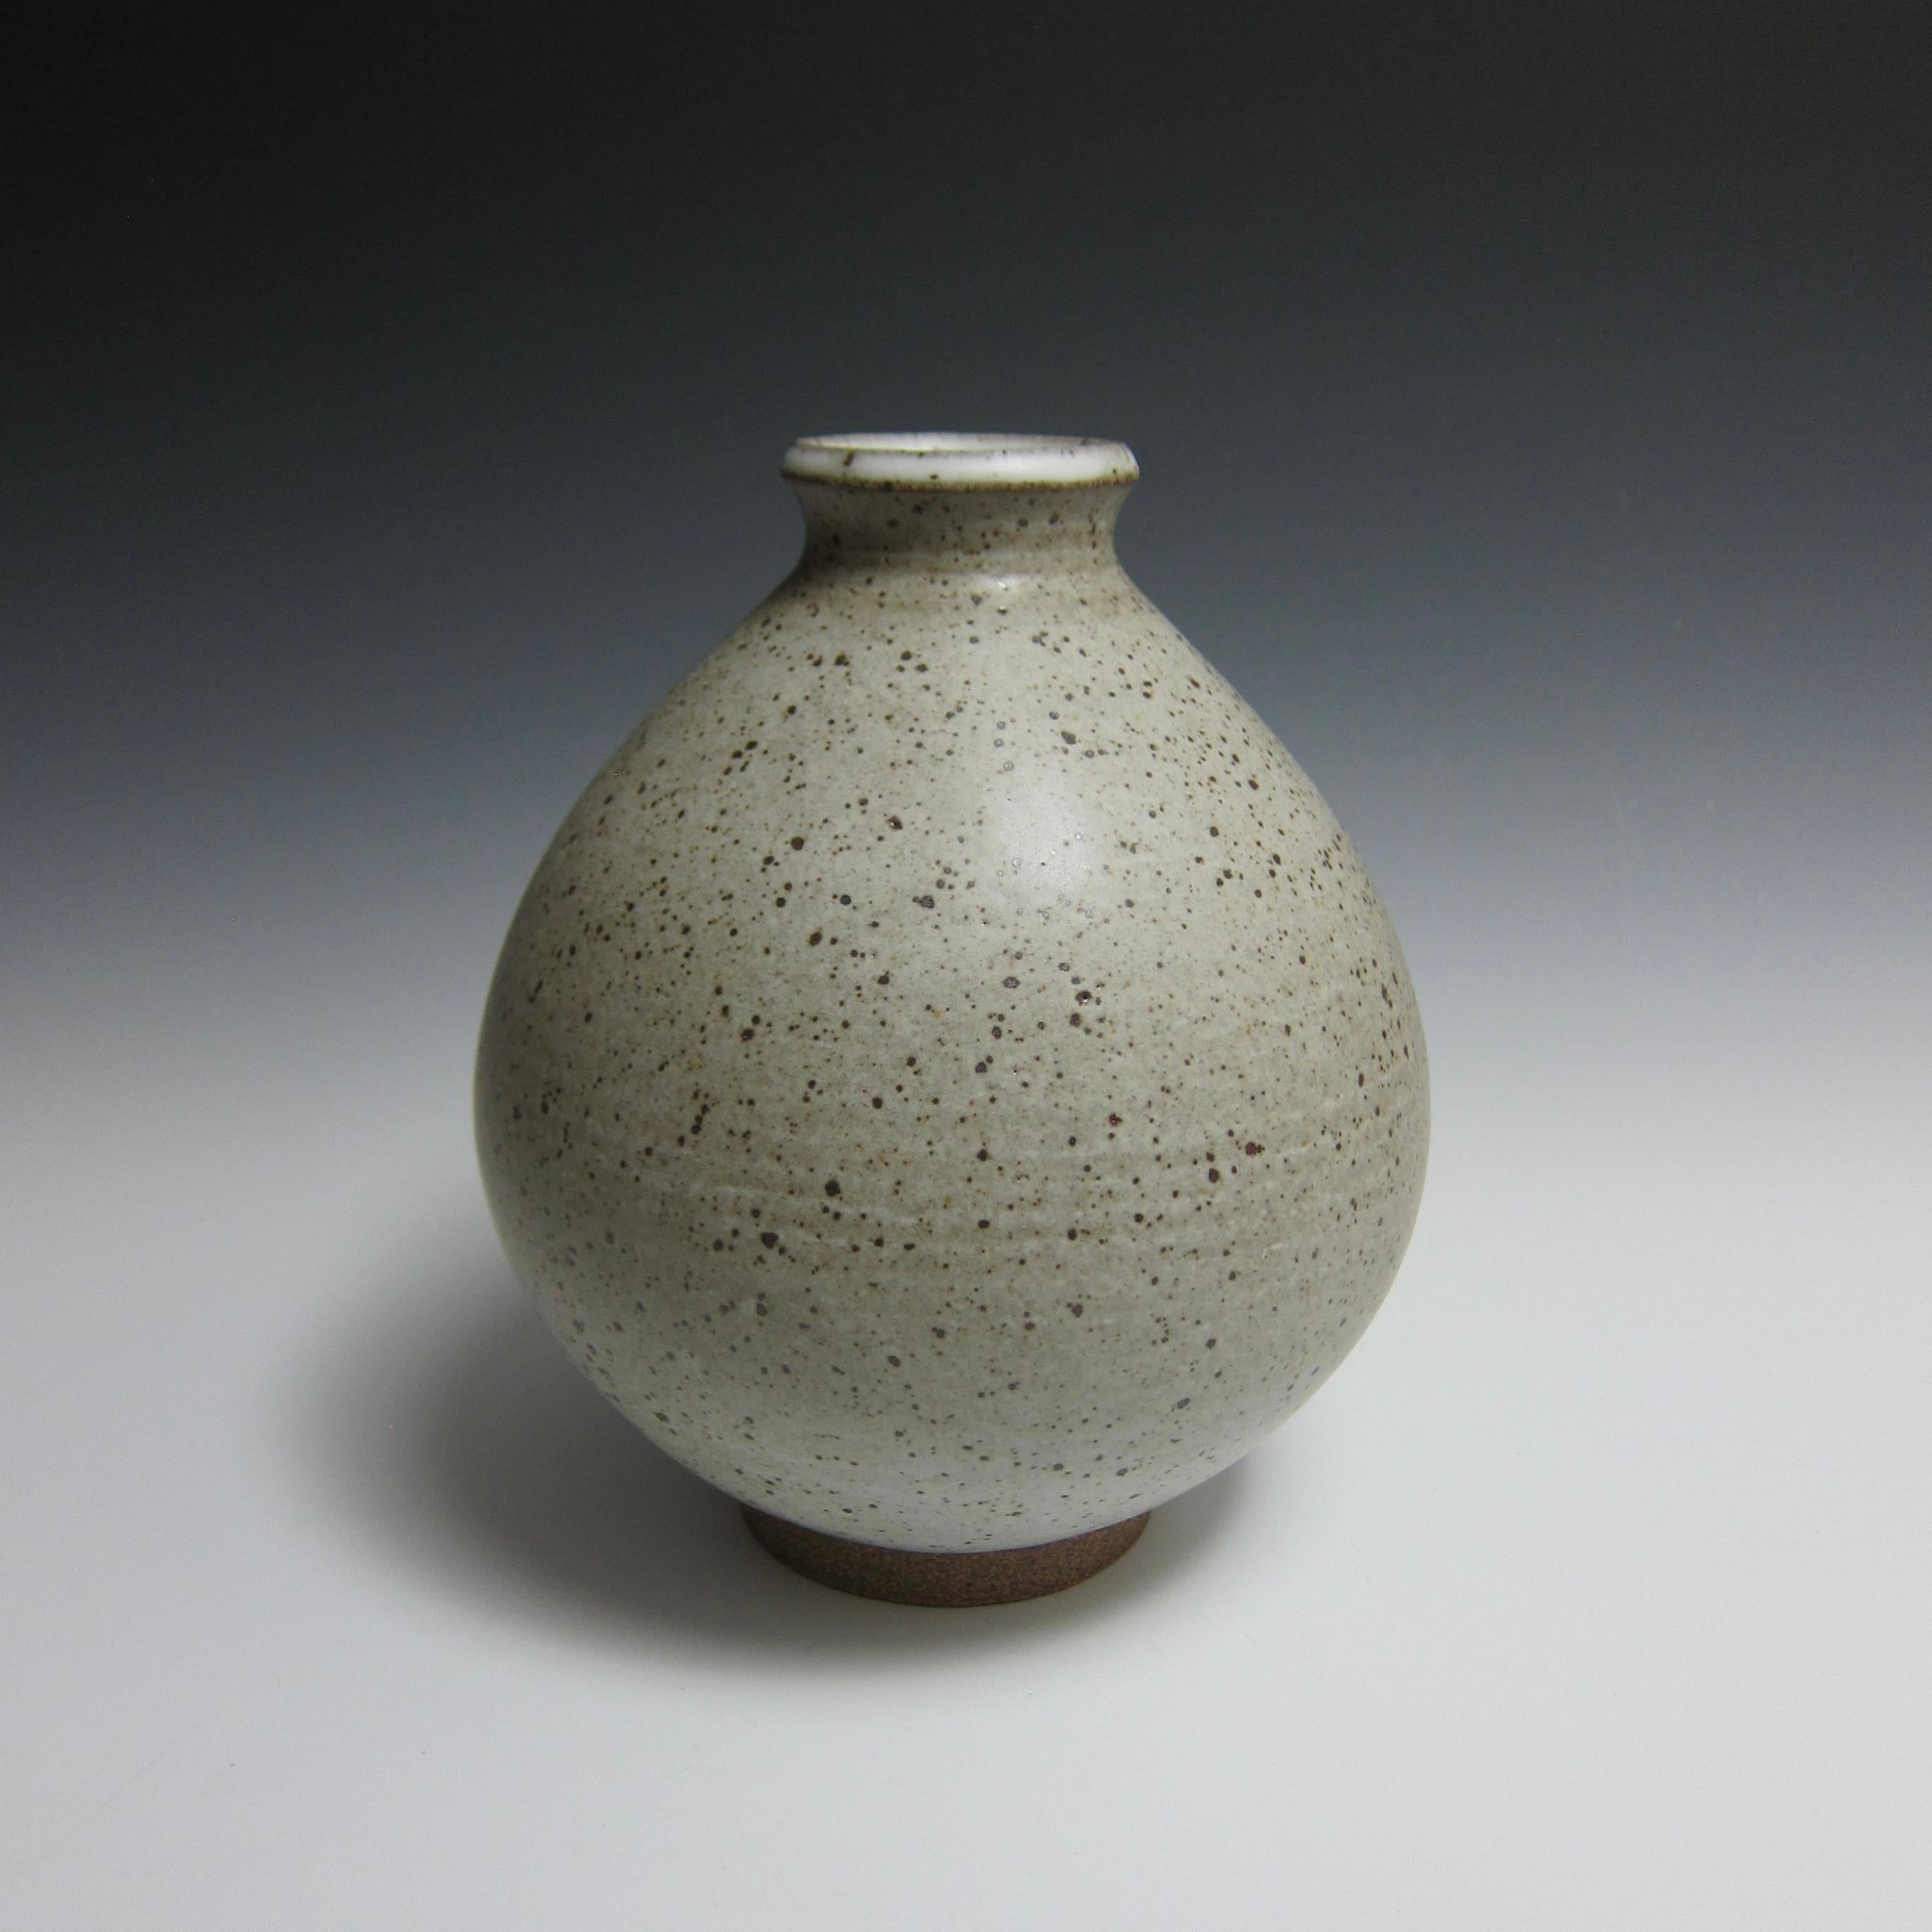 Wheel Thrown Speckled White Flower Bottle by Jason Fox

A Southern Californian for over half his life, Contemporary Ceramic Artist Jason Fox draws upon his classical education in Architecture and Art History as well as his love of surfing and the